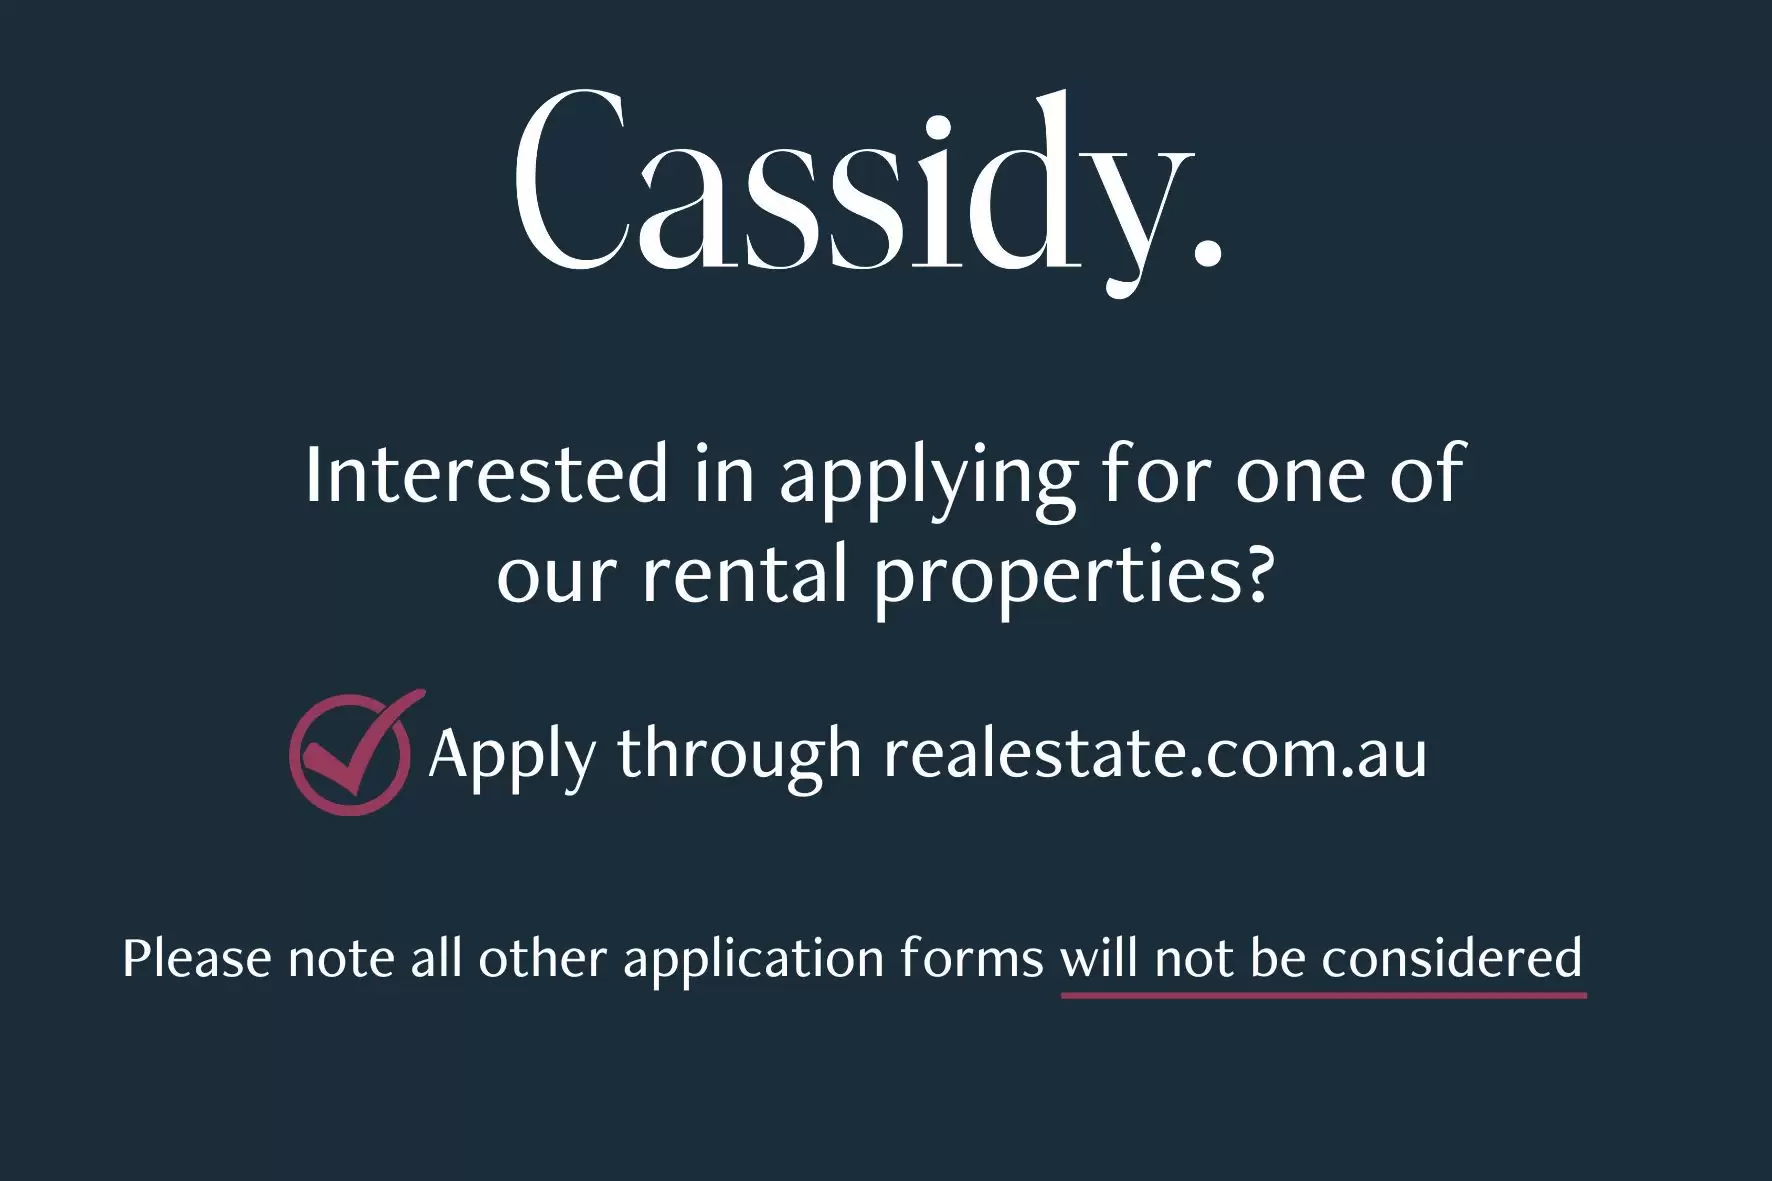 29/7-15 Taranto Road, Marsfield Leased by Cassidy Real Estate - image 1